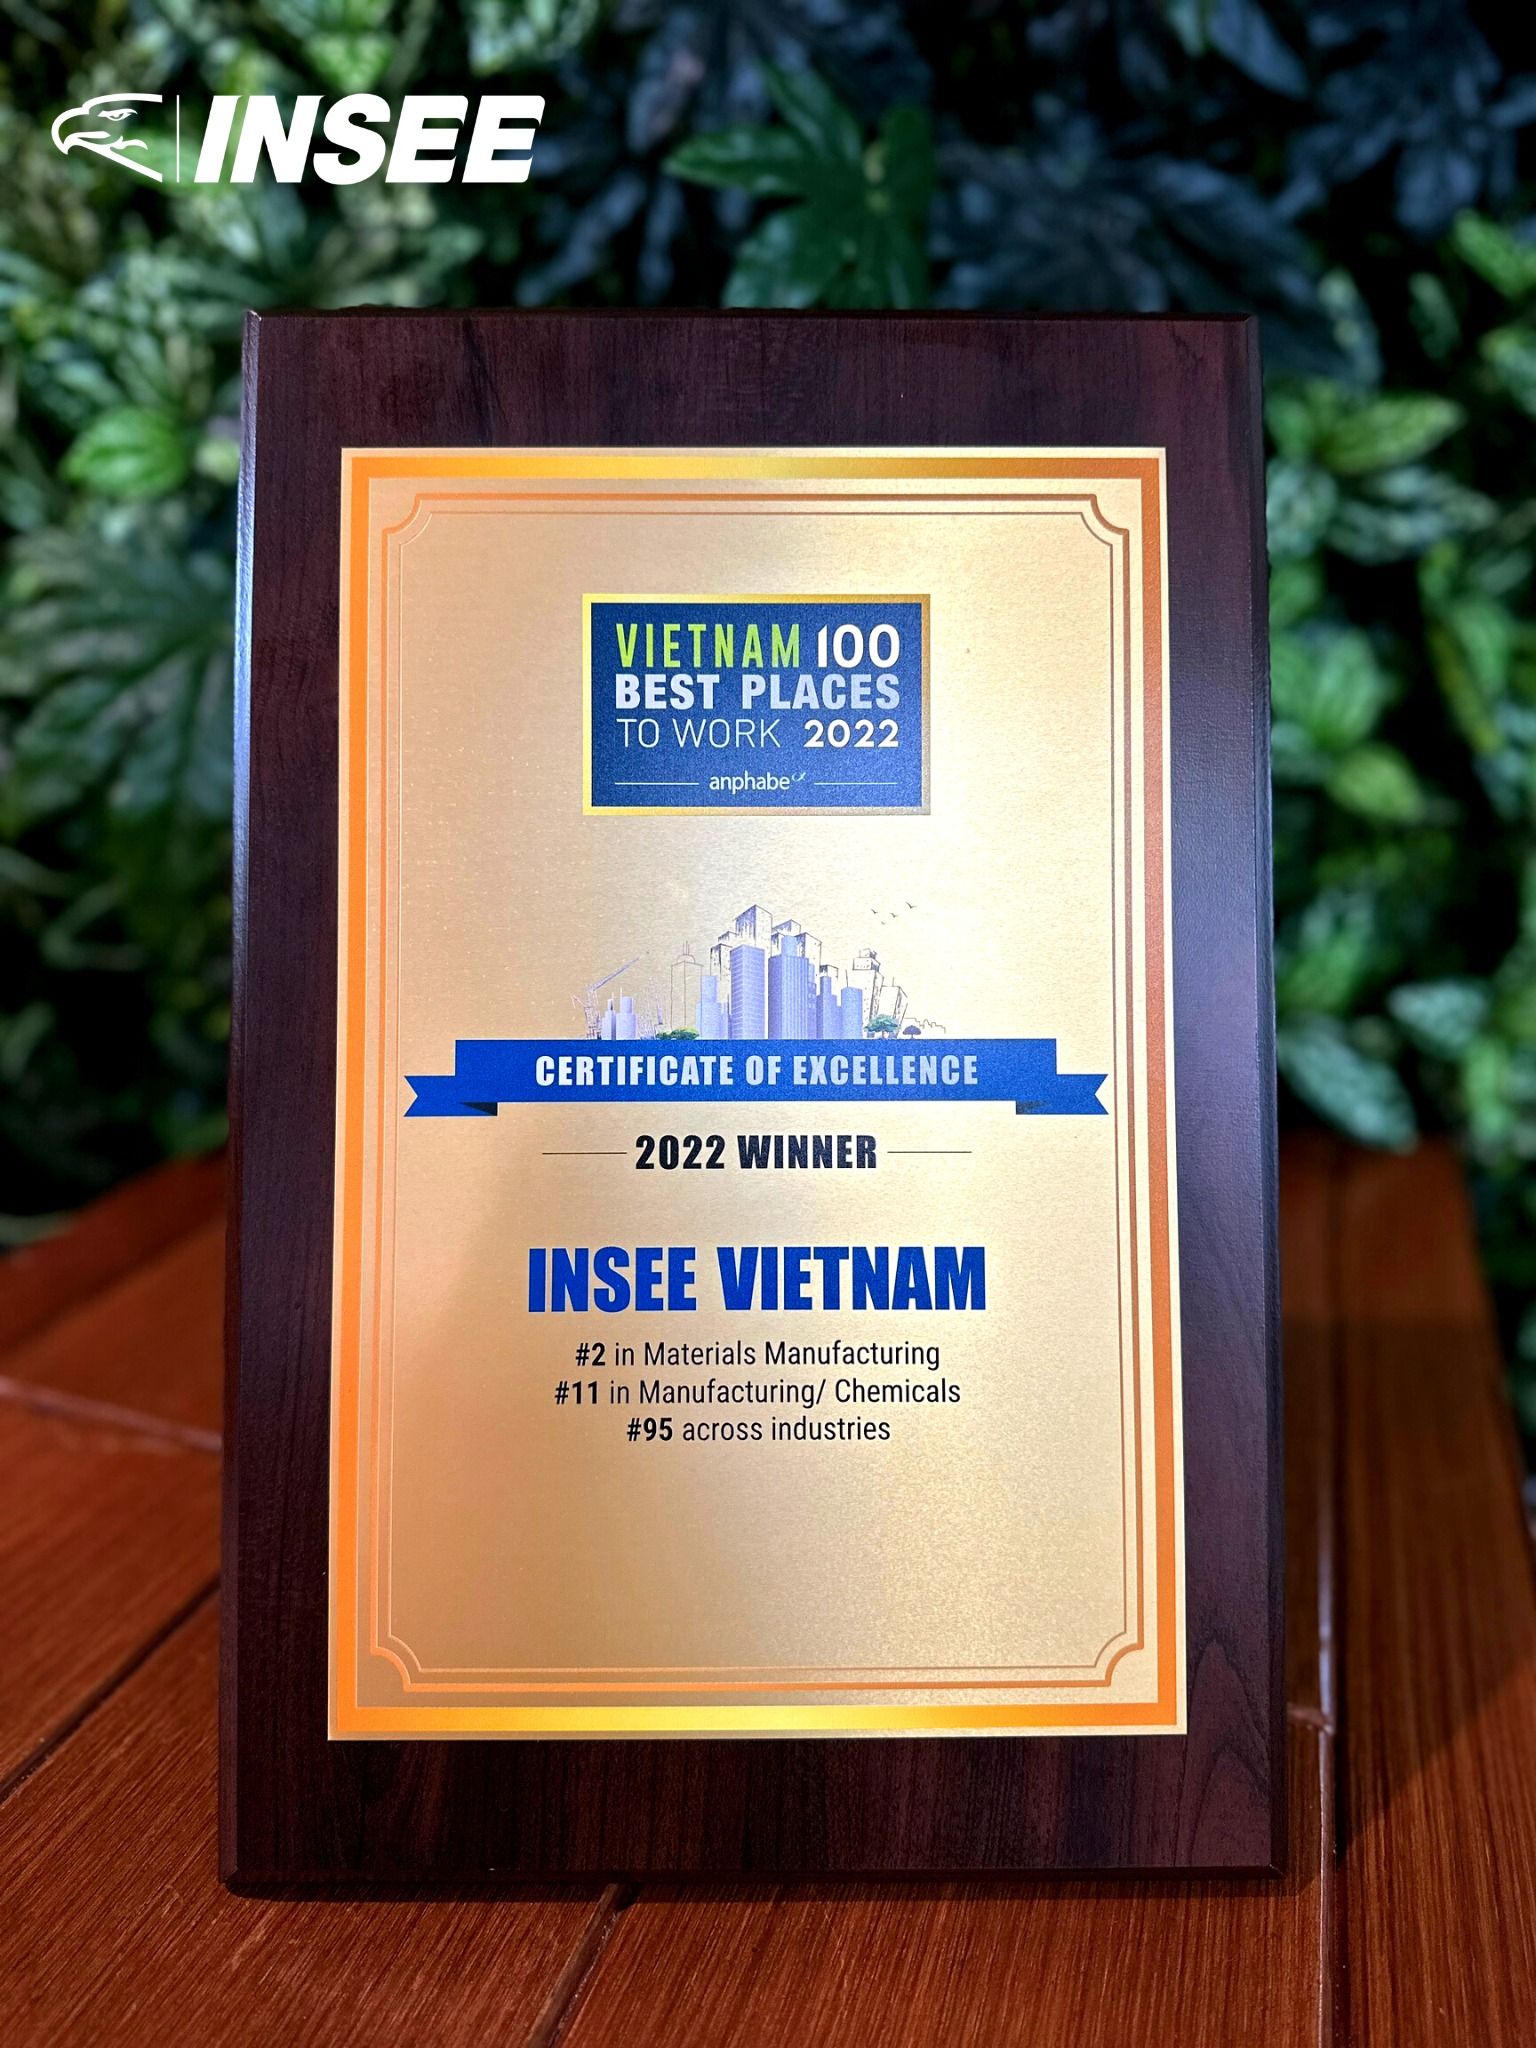 INSEE VIETNAM IS CONTINUOUSLY HONORED IN THE “TOP 100 VIETNAM BEST PLACES TO WORK 2022”